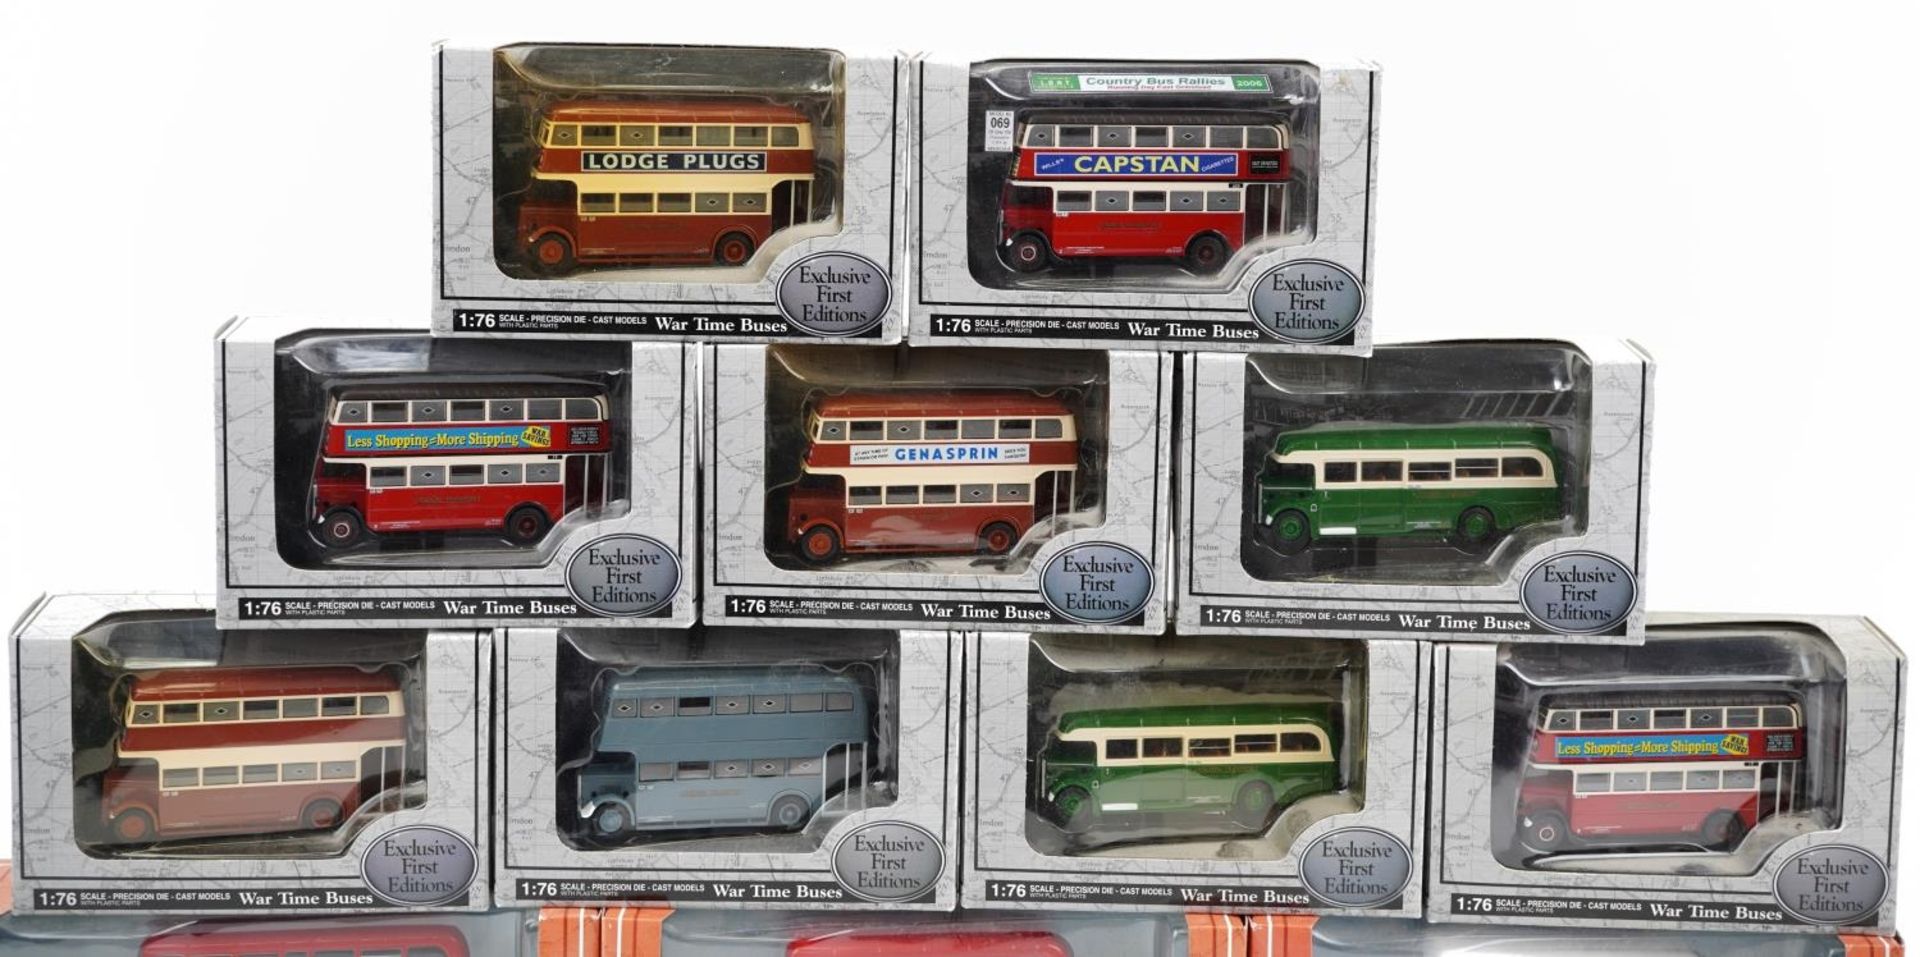 Sixteen Exclusive First Editions 1:76 scale diecast model buses with boxes from The Wartime Buses - Image 2 of 4